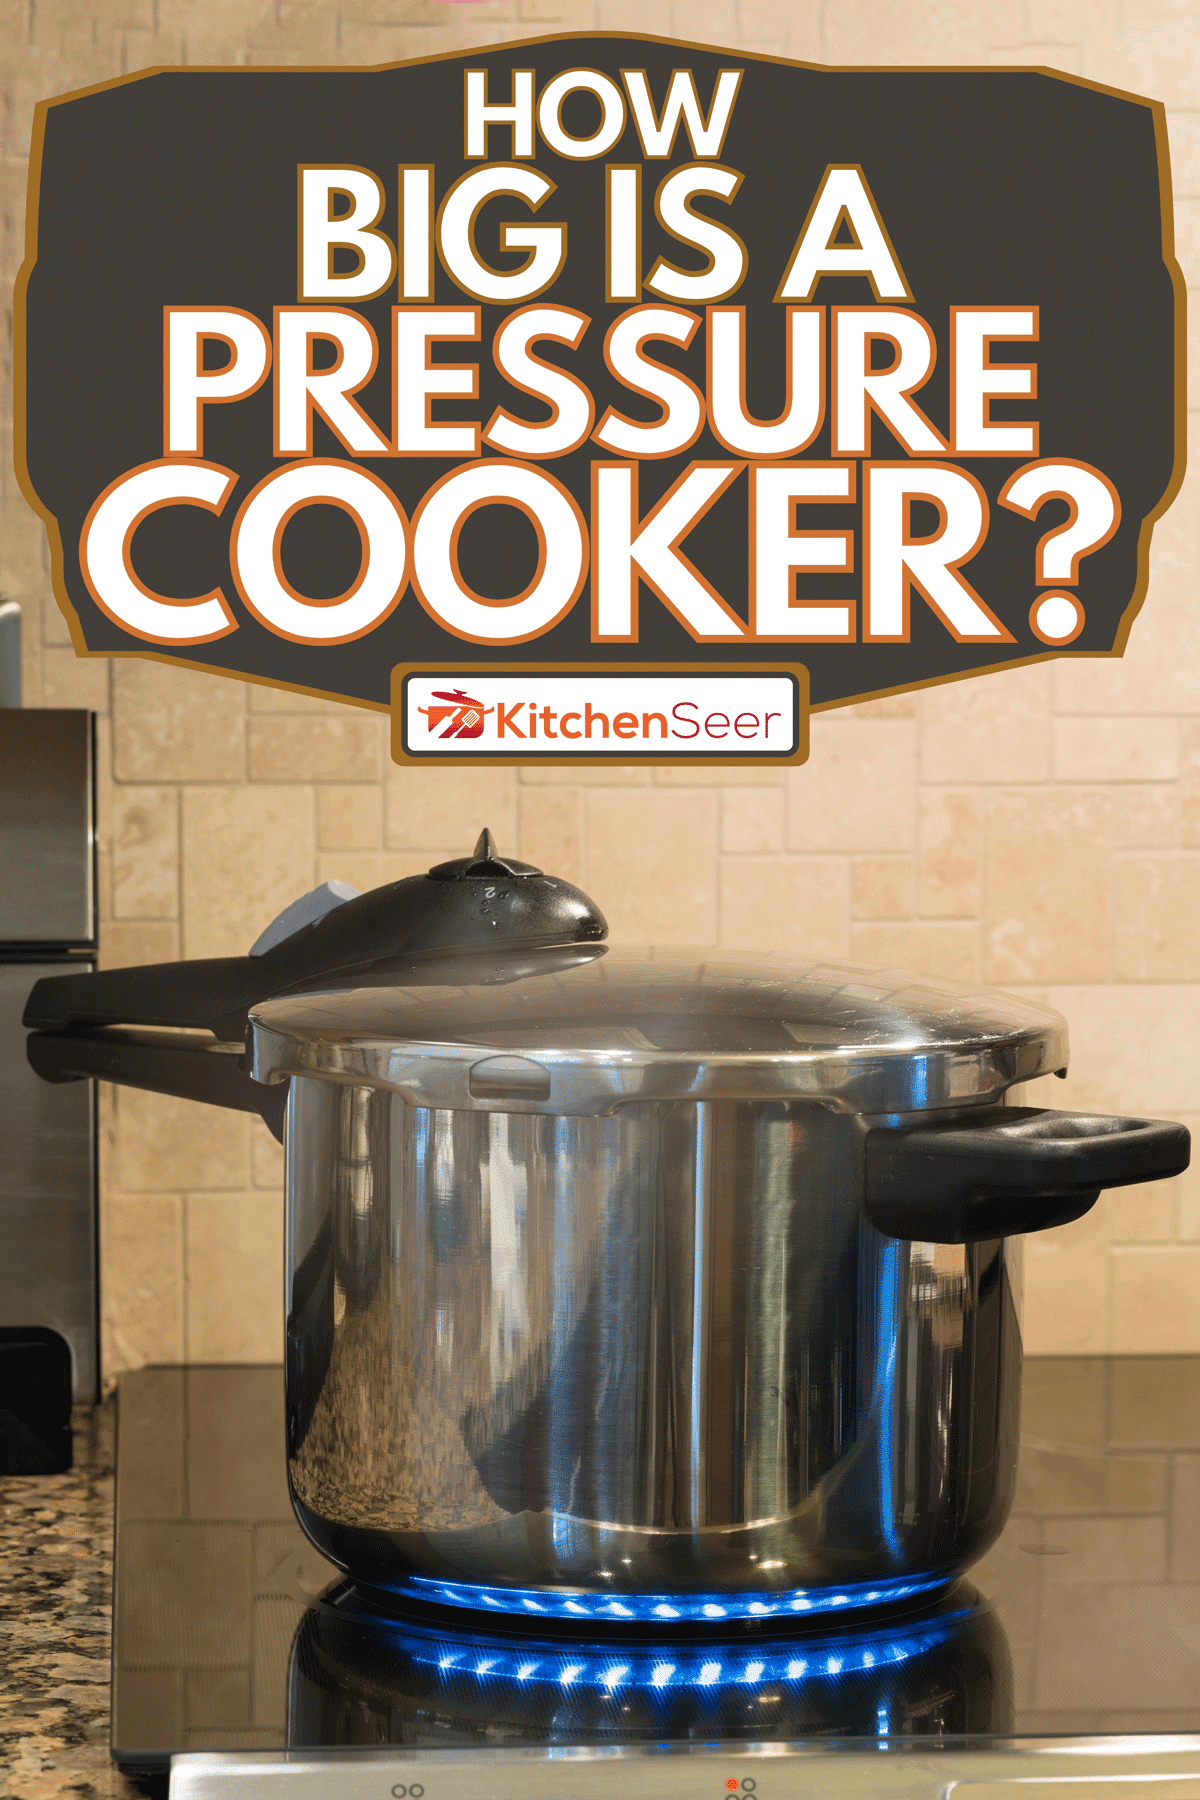 A stainless steel pressure cooker, How Big Is A Pressure Cooker?